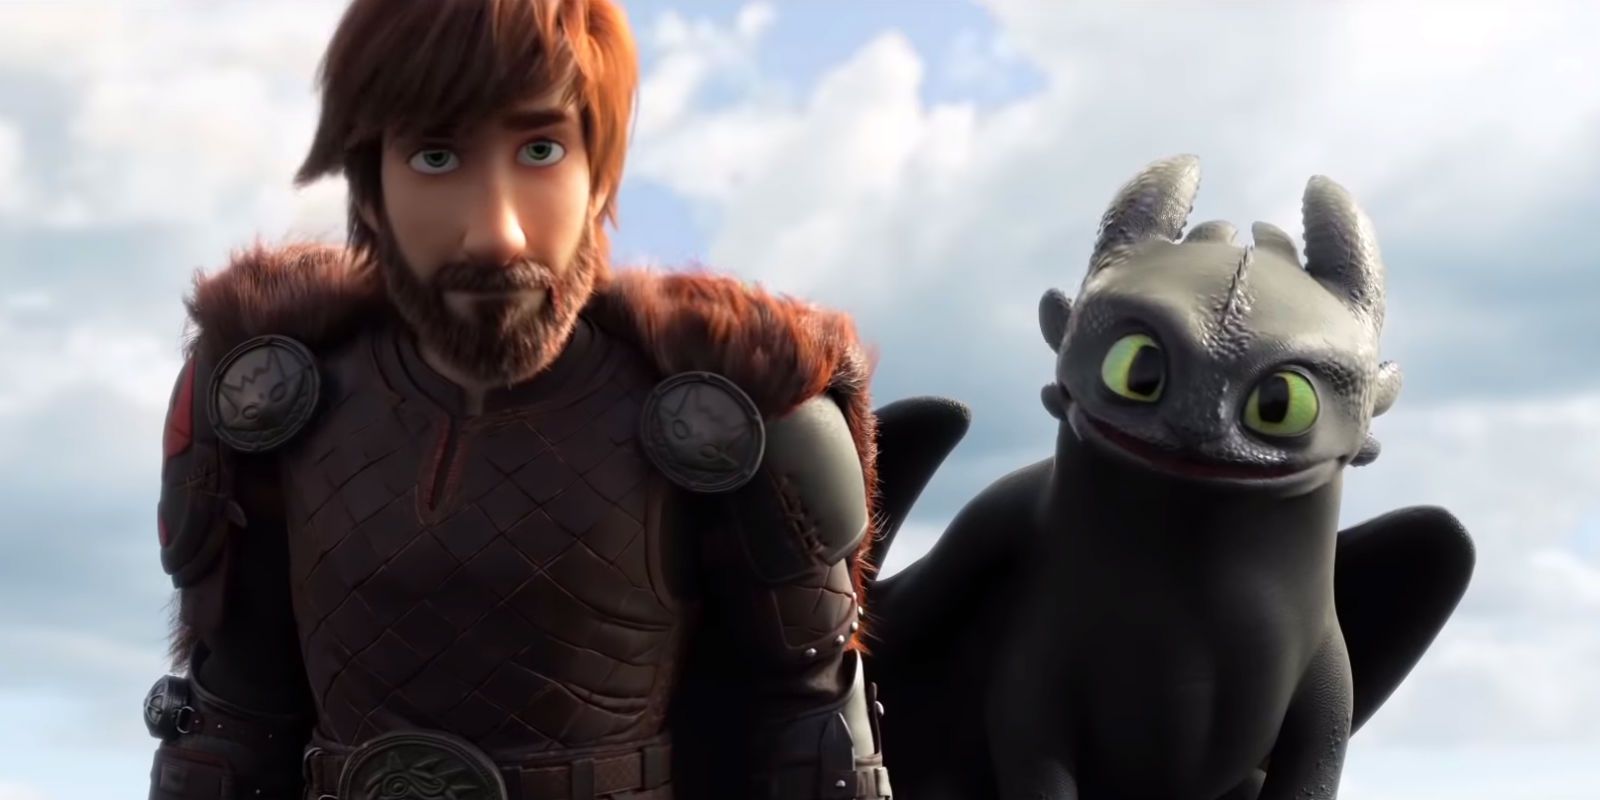 Hiccup and Toothless in How To Train Your Dragon 3